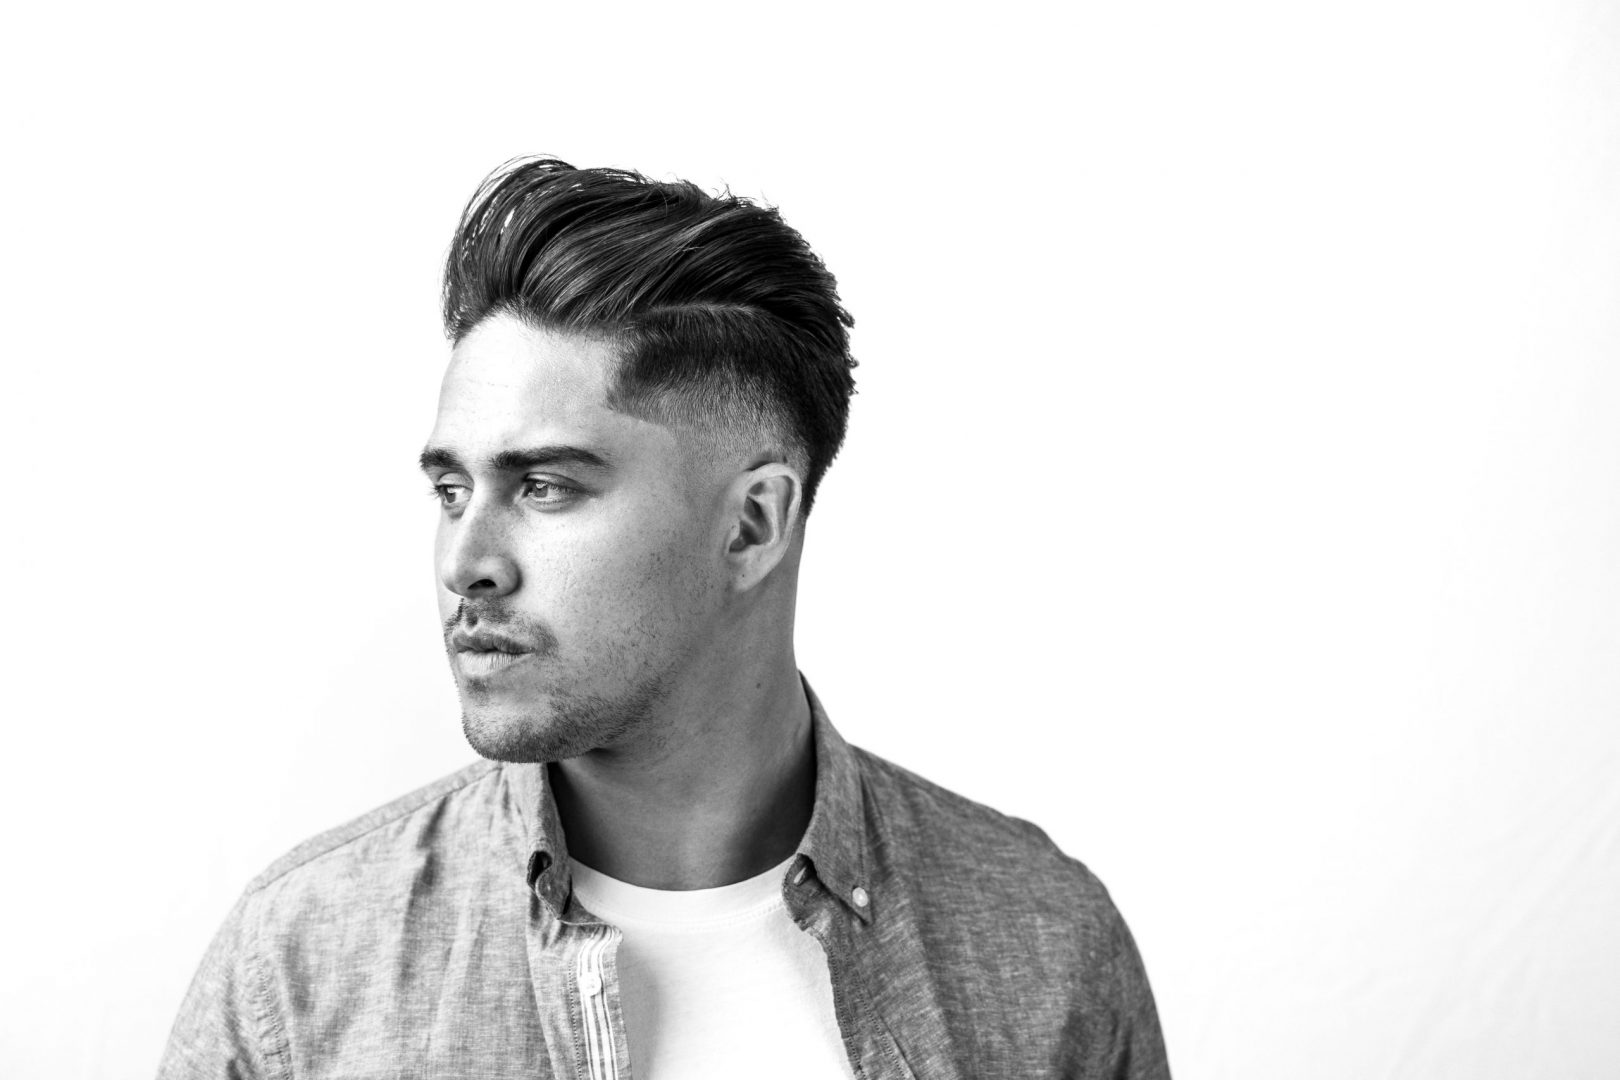 How To Rock The Pompadour Look With Confidence